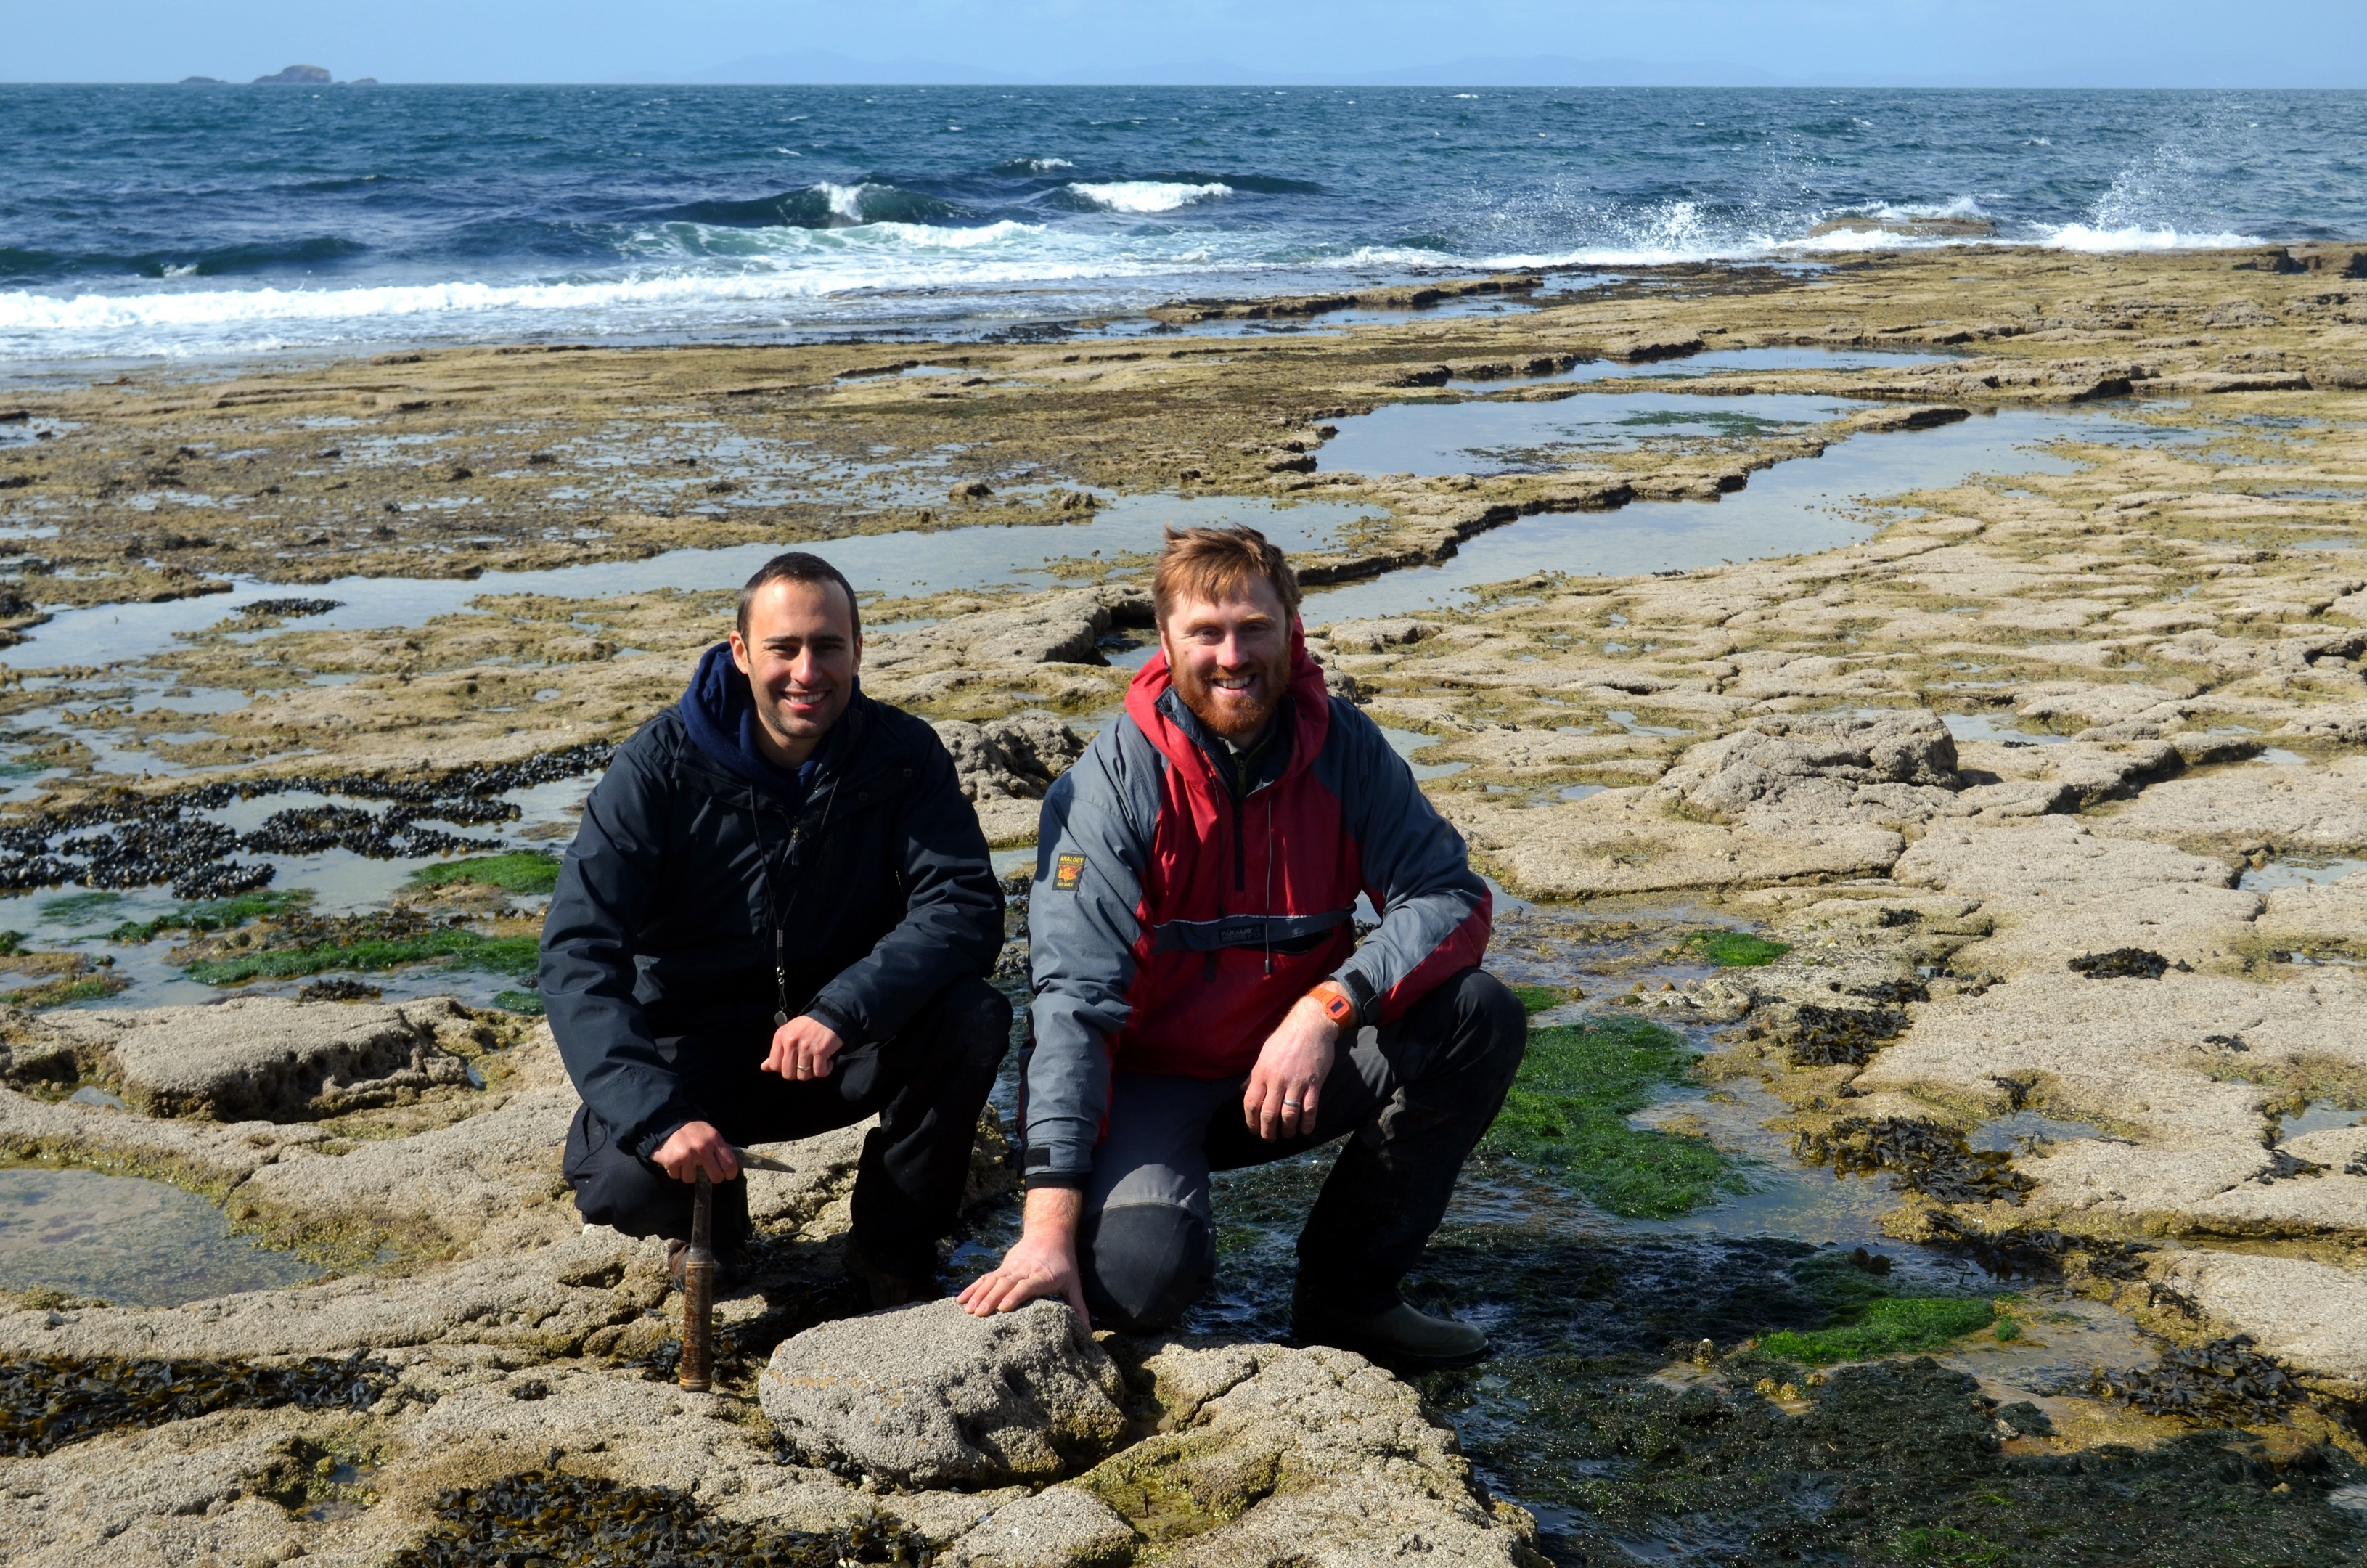 Dr Steve Brusatte (L) and Dr Tom Challands(R) by sauropod dinosaur tracks made 170 million years ago on the Isle of Skye.